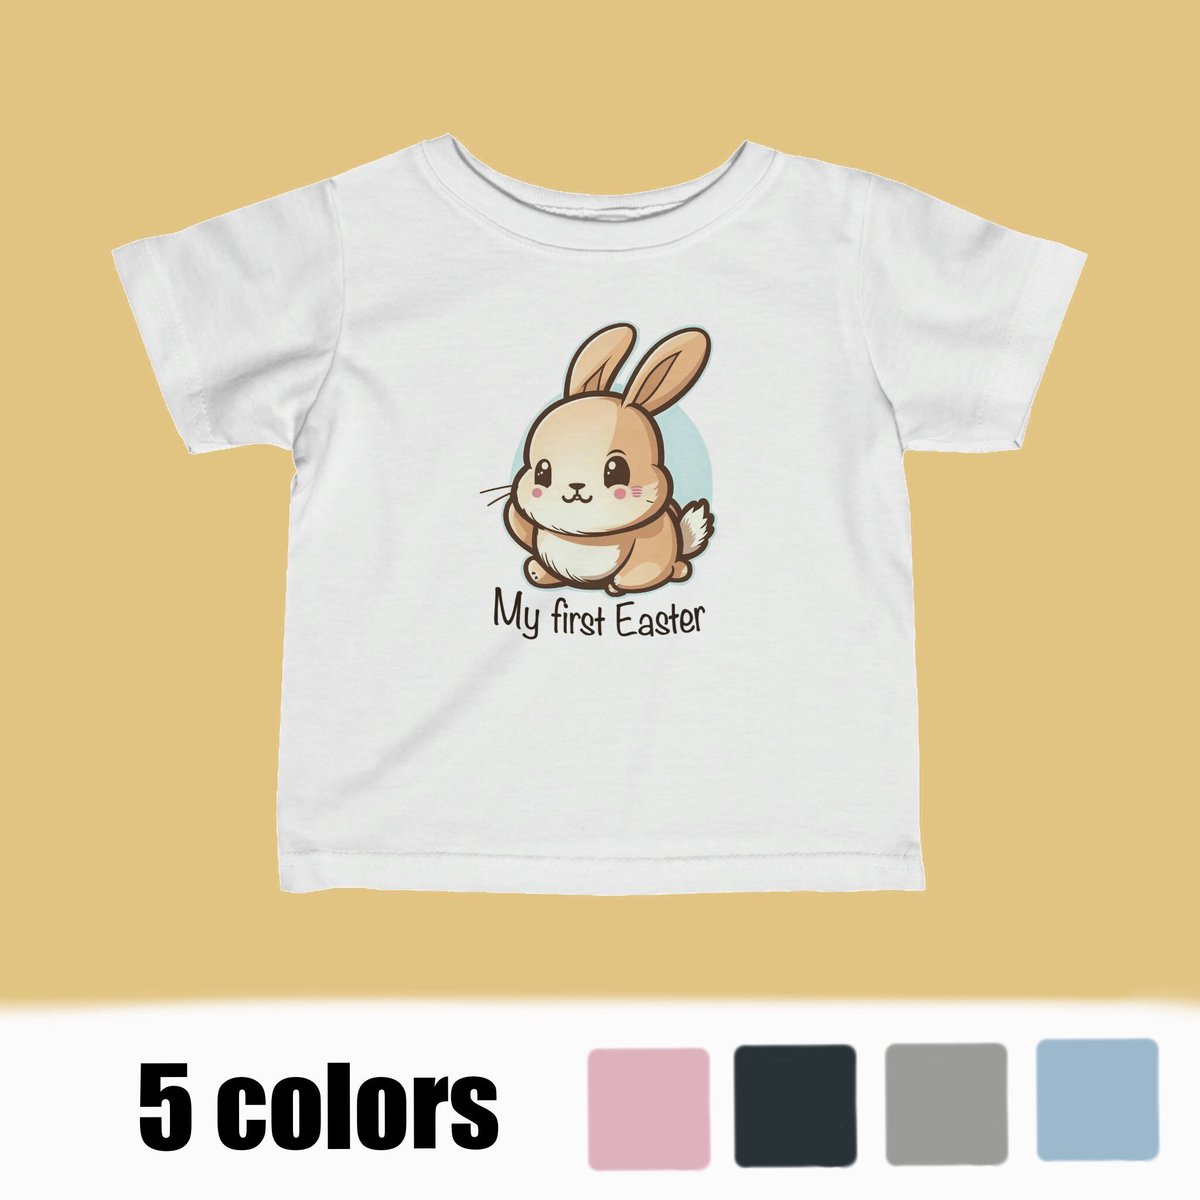 Im working on design for the little one for this Easter, I already have some available at my #etsy, check it out! #bunnykidsshirt #easterkidsshirt #bunnybabyshirt #easterbabyshirt #toddlershirt #cutebabygift #easterbabygift #babyboyoutfit #babygirloutfit etsy.me/3mZOnNO